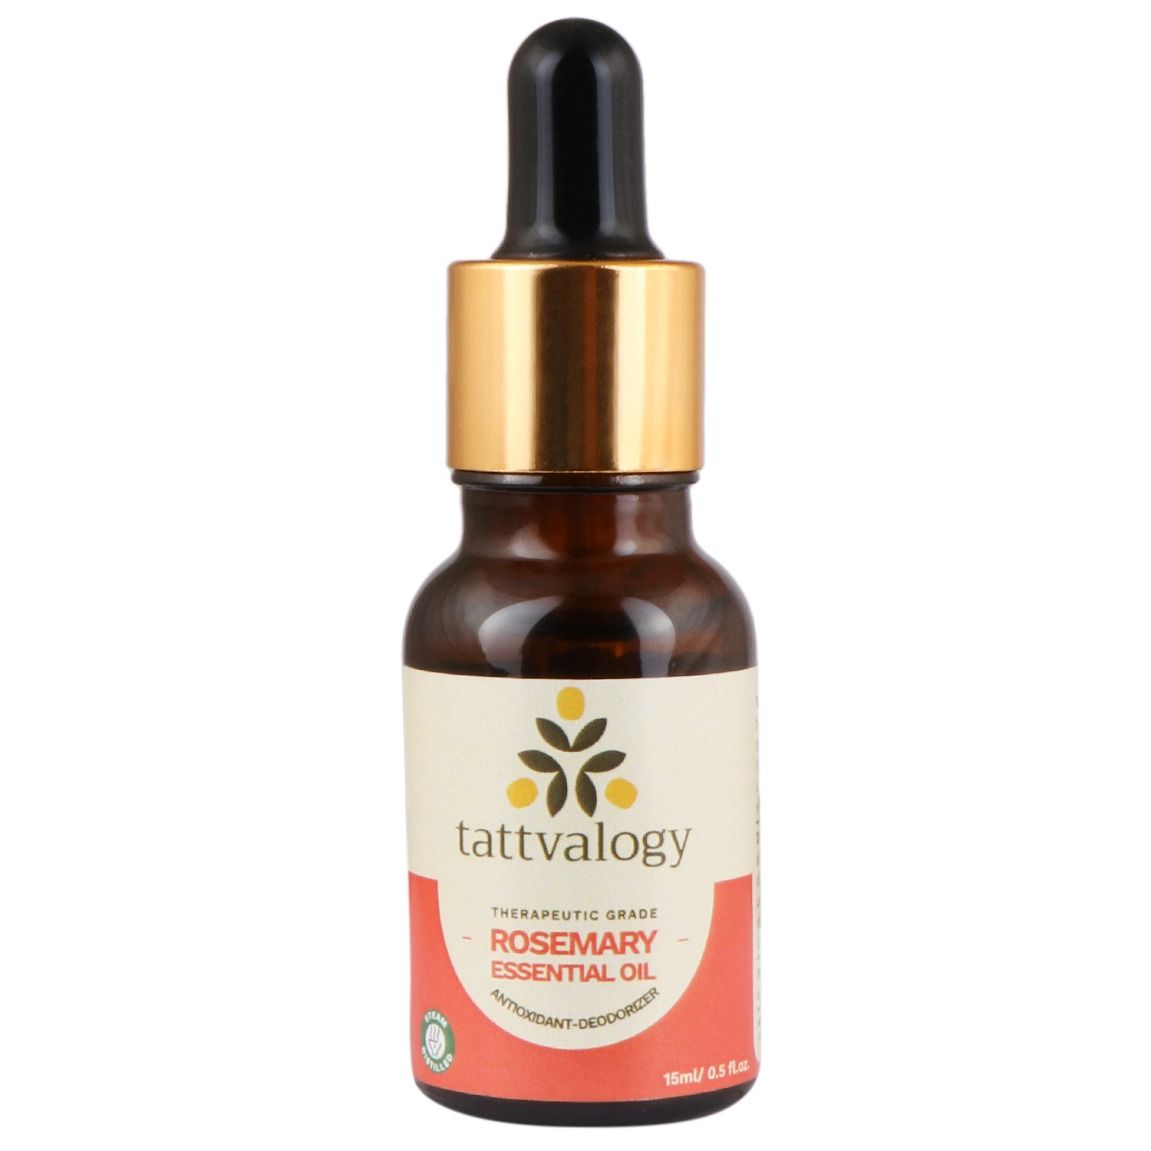 Tattvalogy Rosemary Essential Oil, Therapeutic Grade